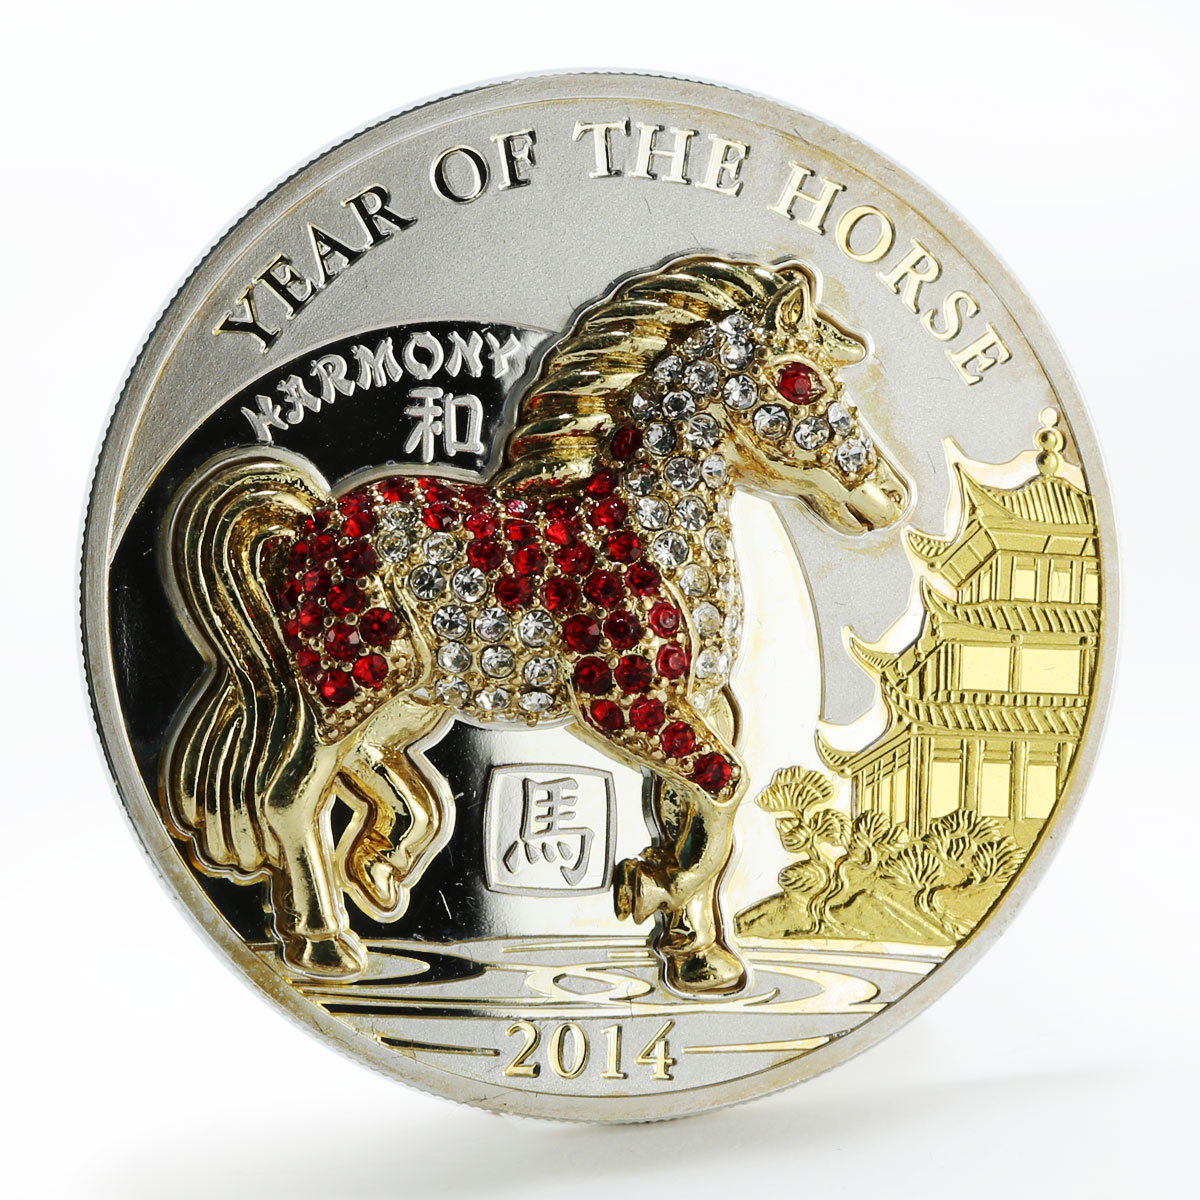 Rwanda set of 3 coins Year of the Horse gilded silver 2014